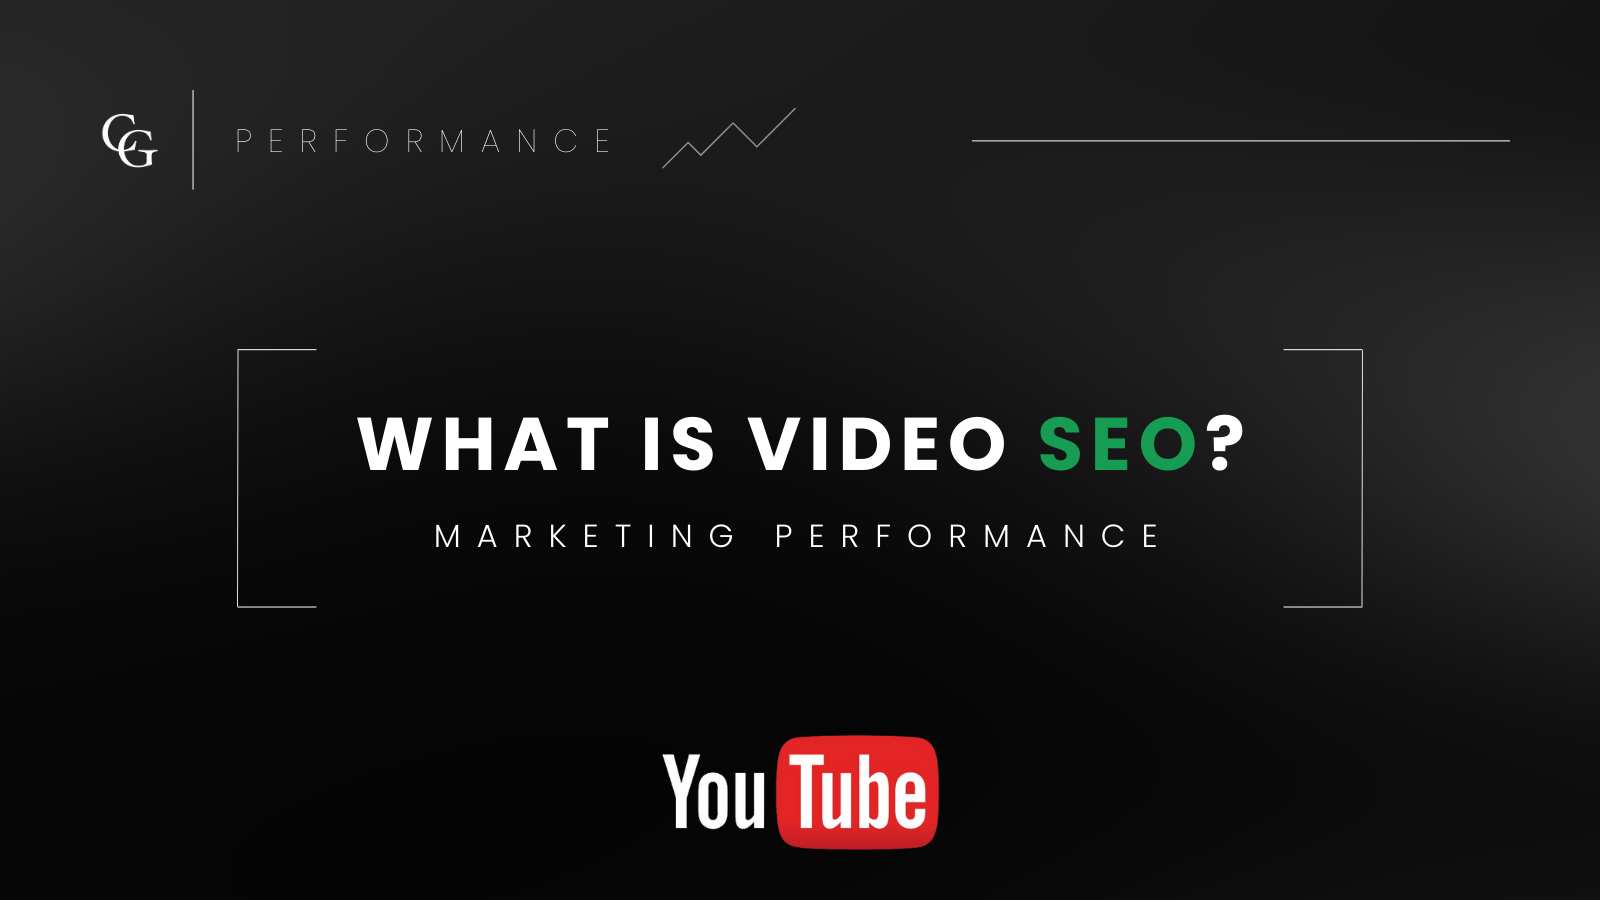 What is Video SEO?